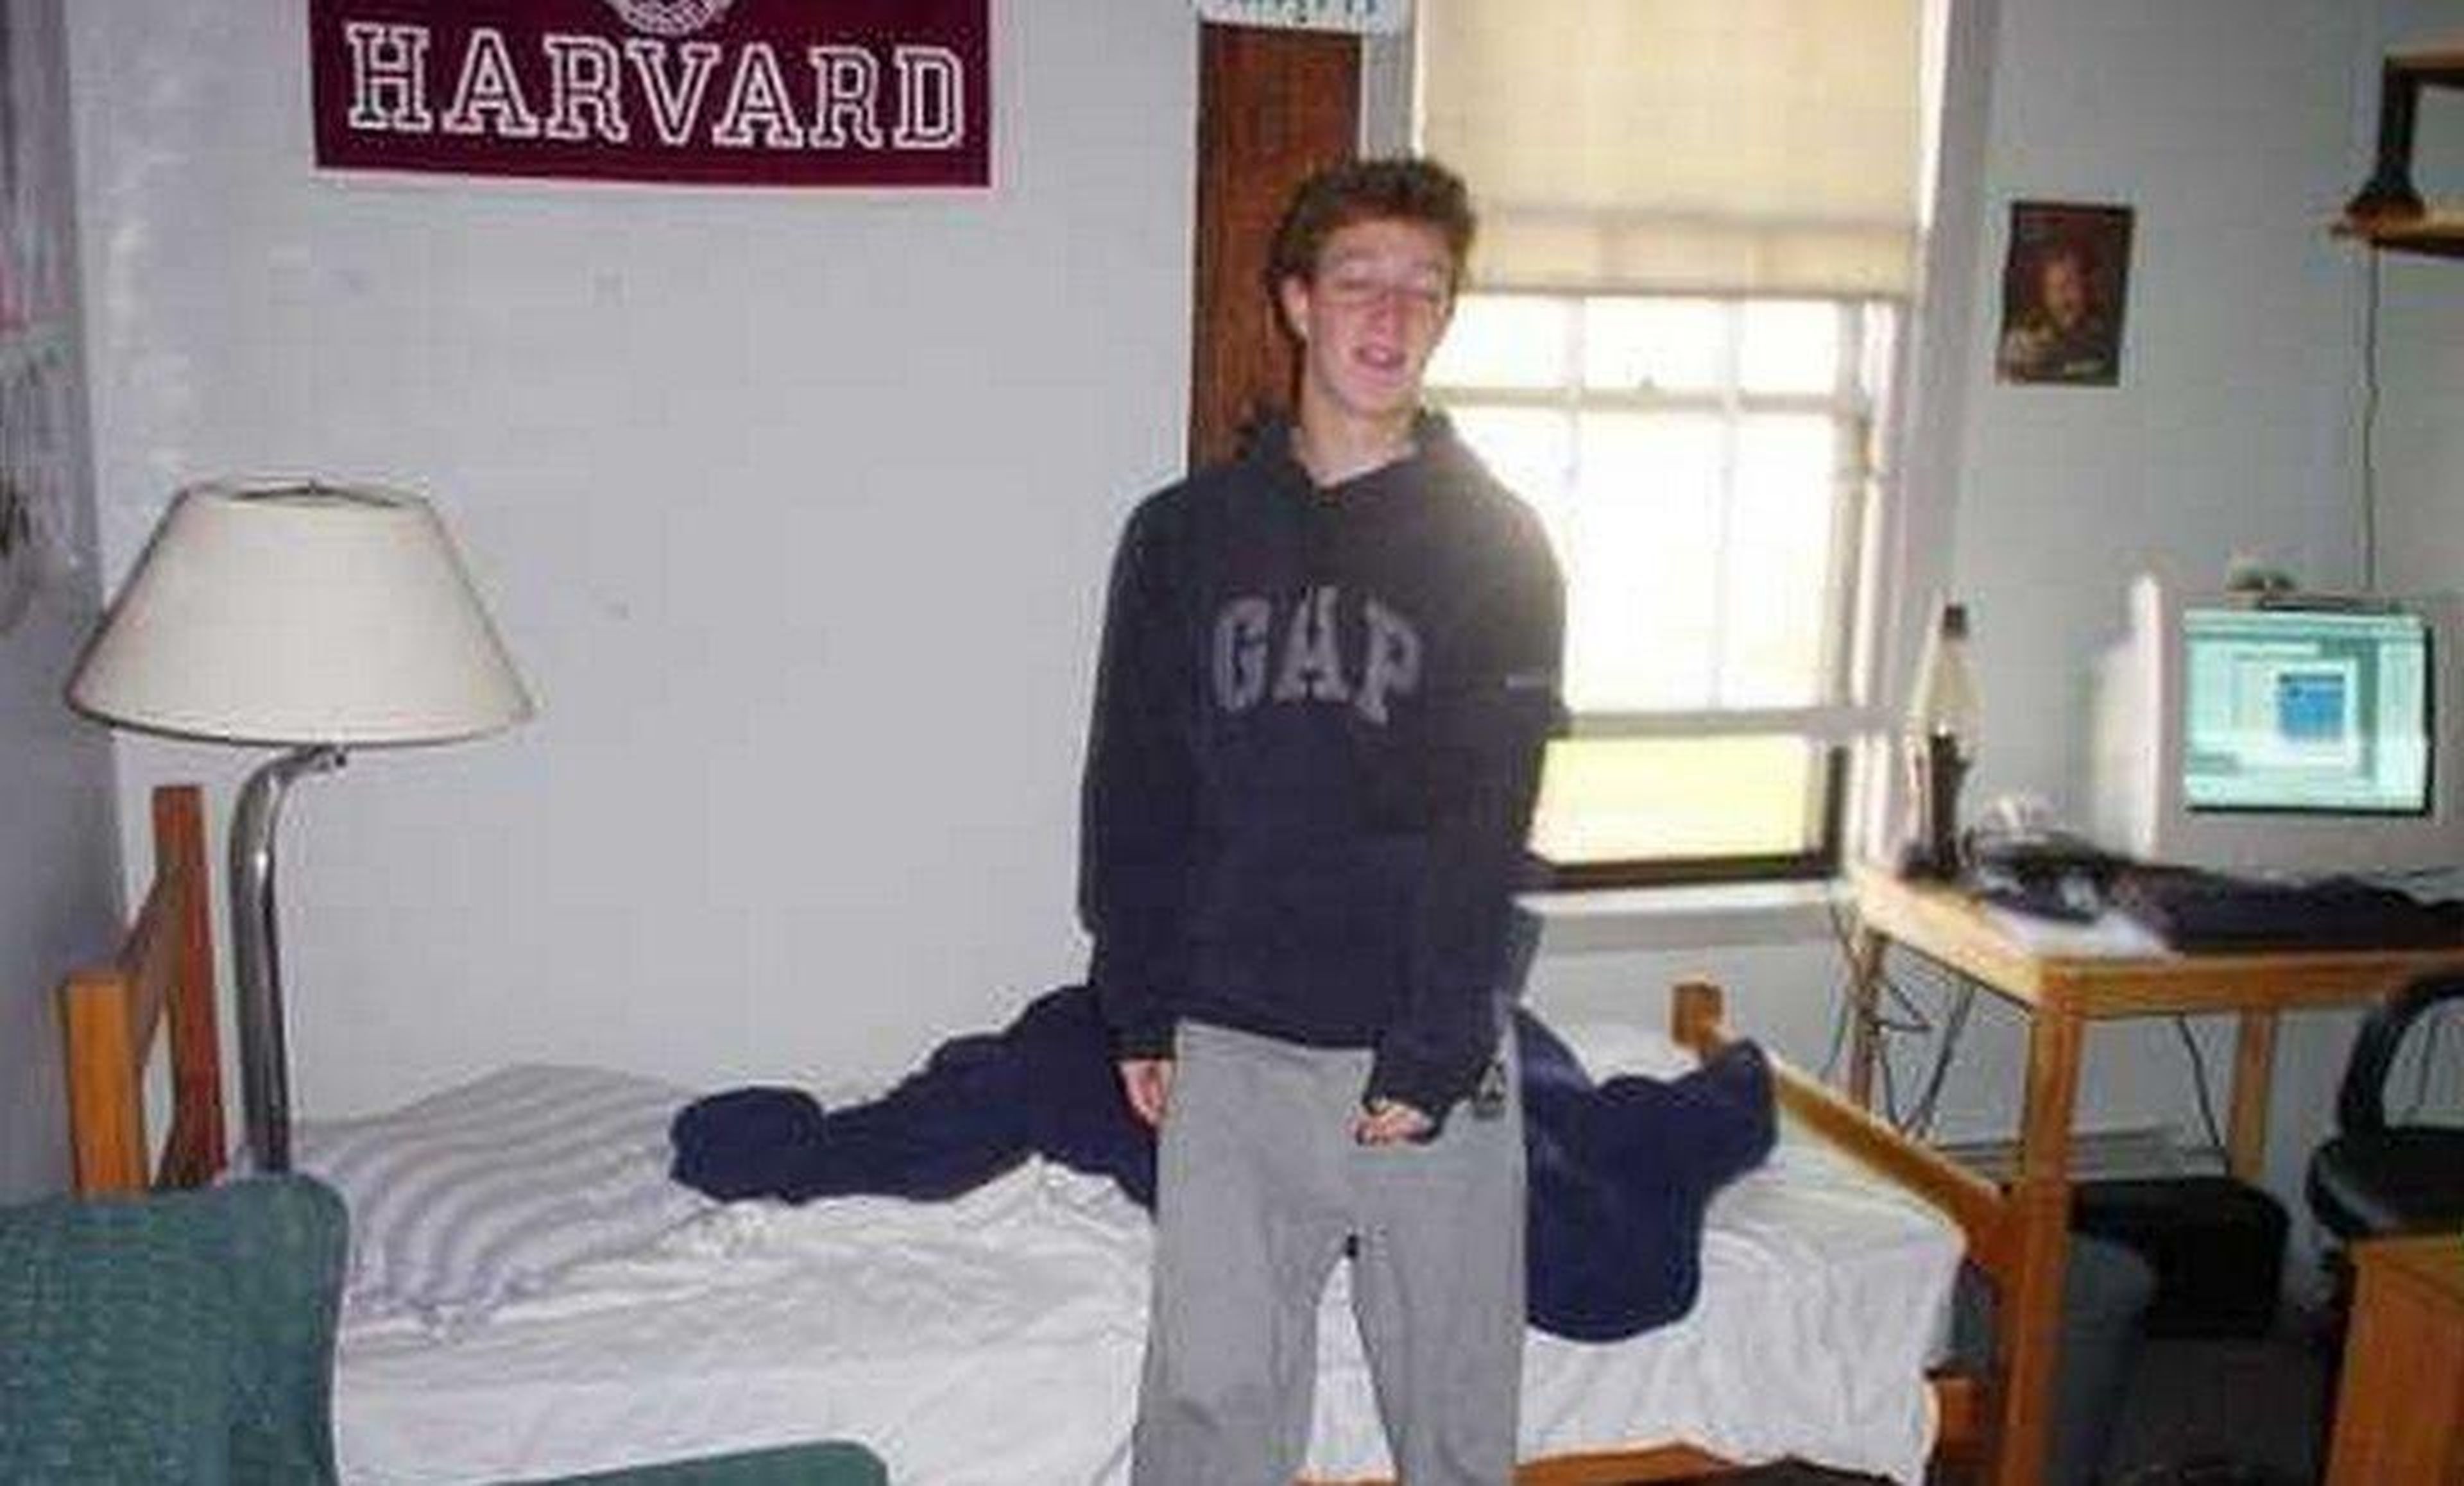 Within a month of the launch, half of Harvard students were Facebook members. Zuckerberg dropped out of school in 2004 to focus on growing the business.